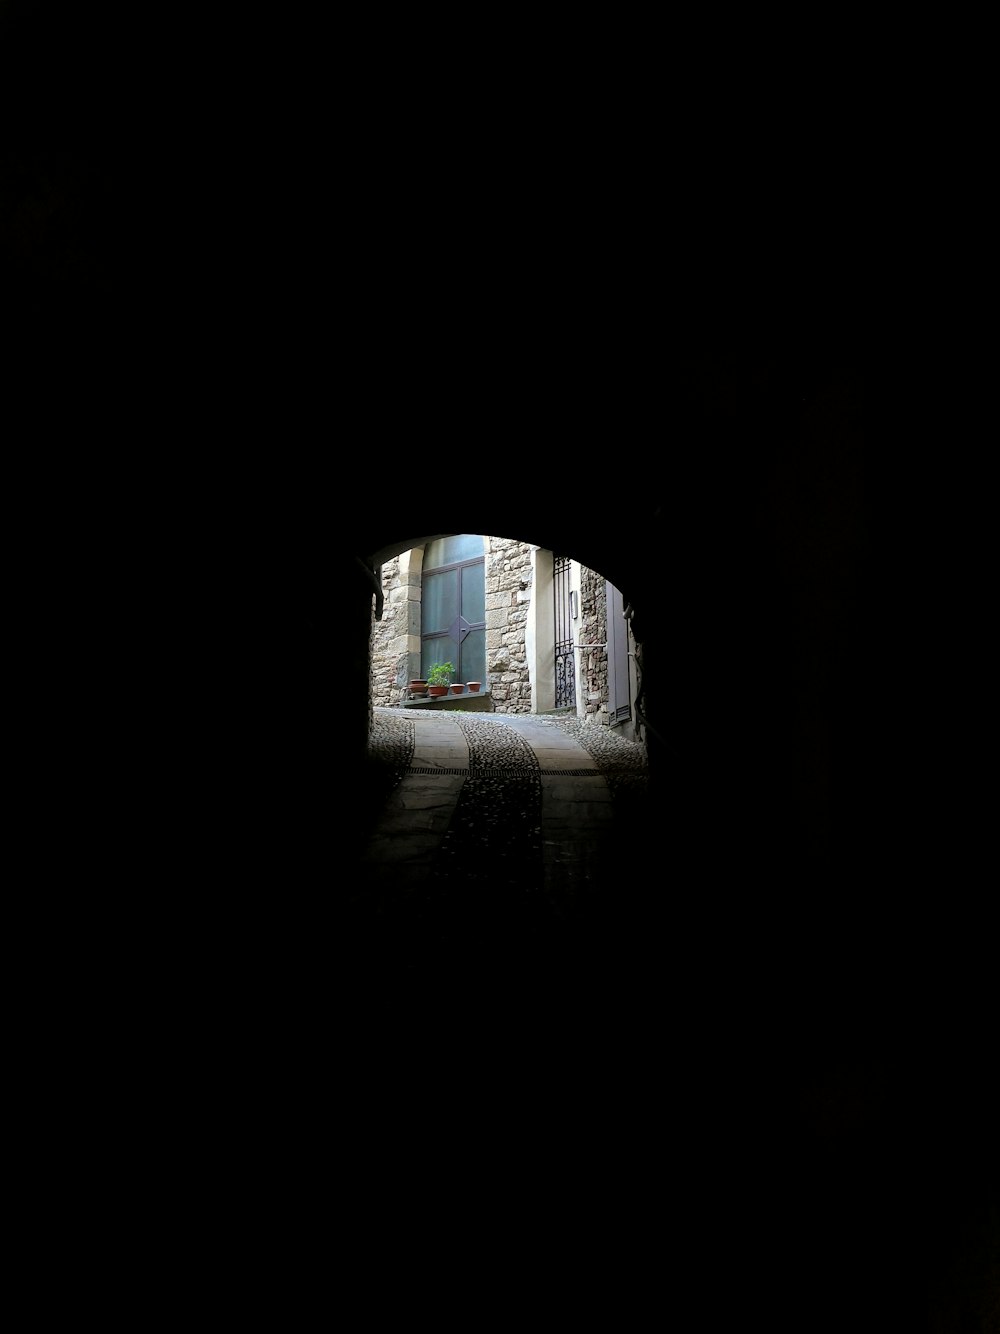 tunnel with blue and white windows